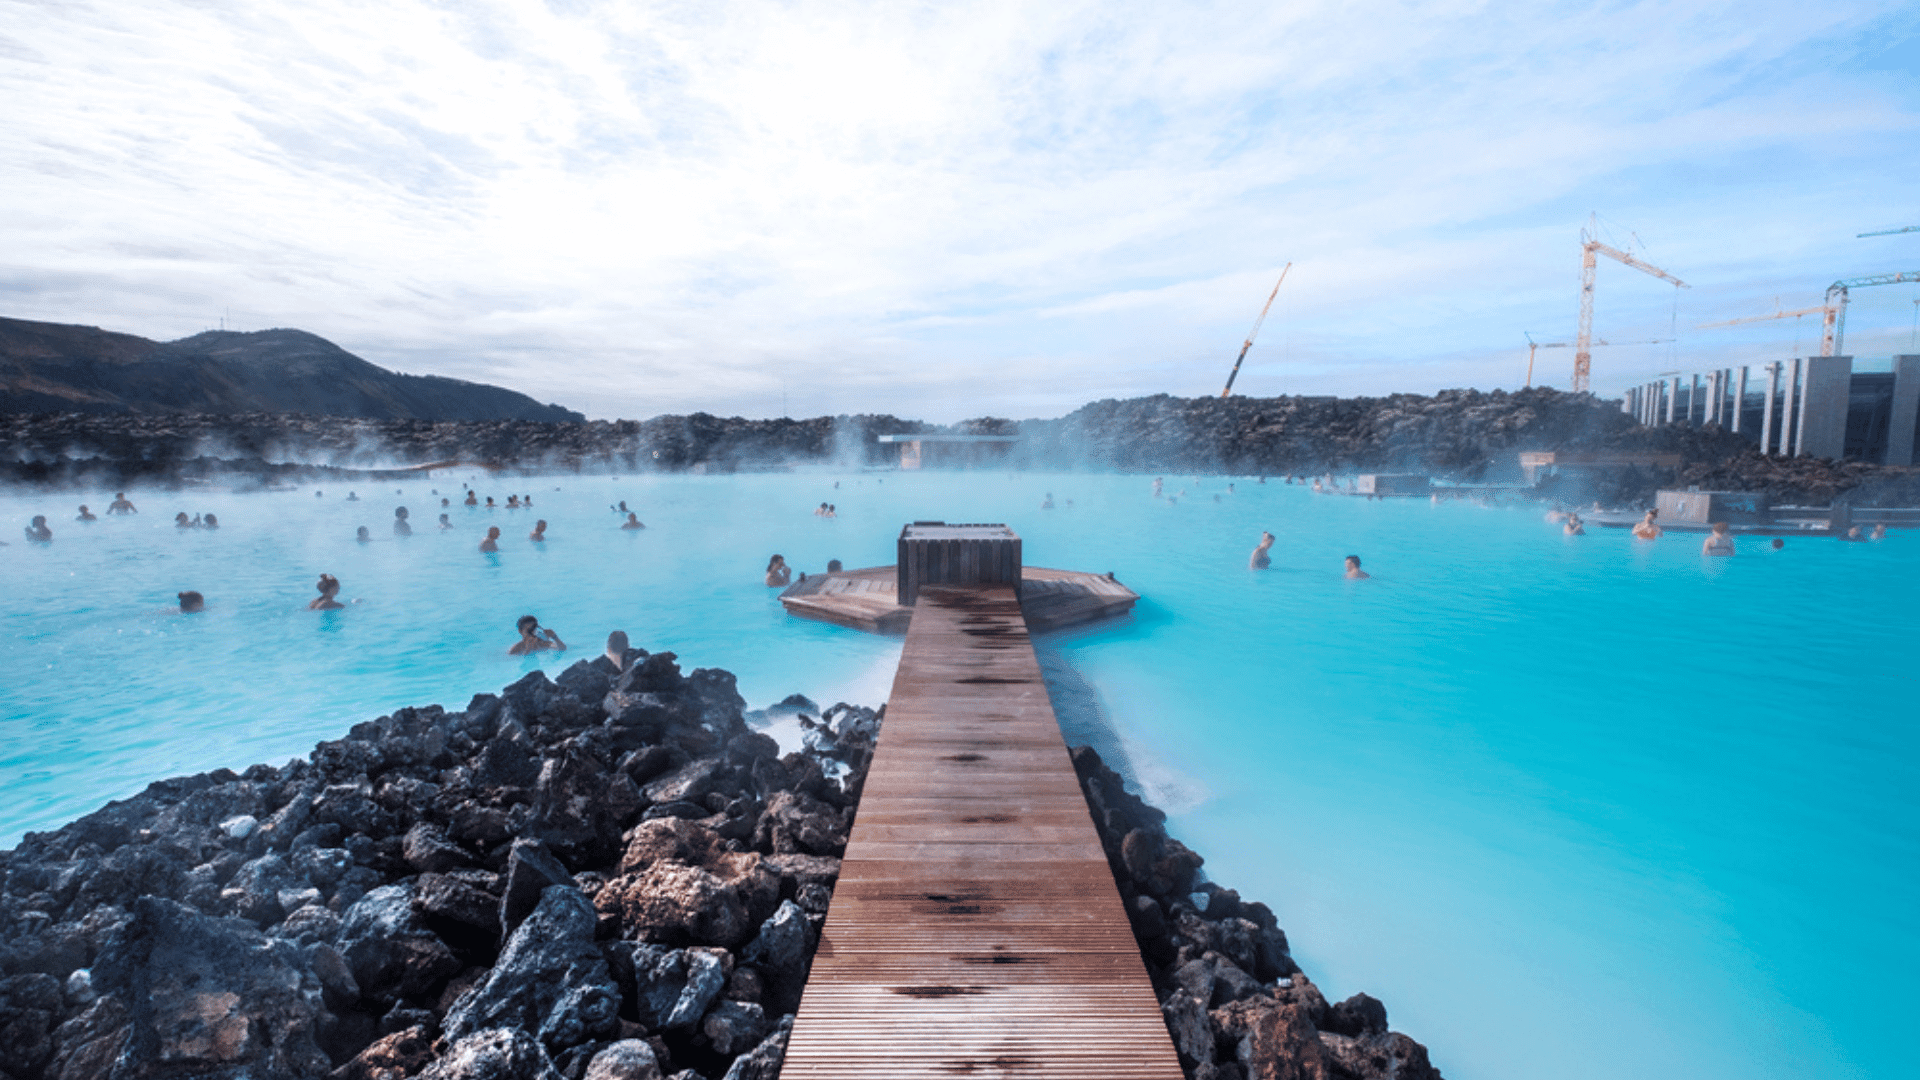 The Blue Lagoon Geothermal Power Healing Spa